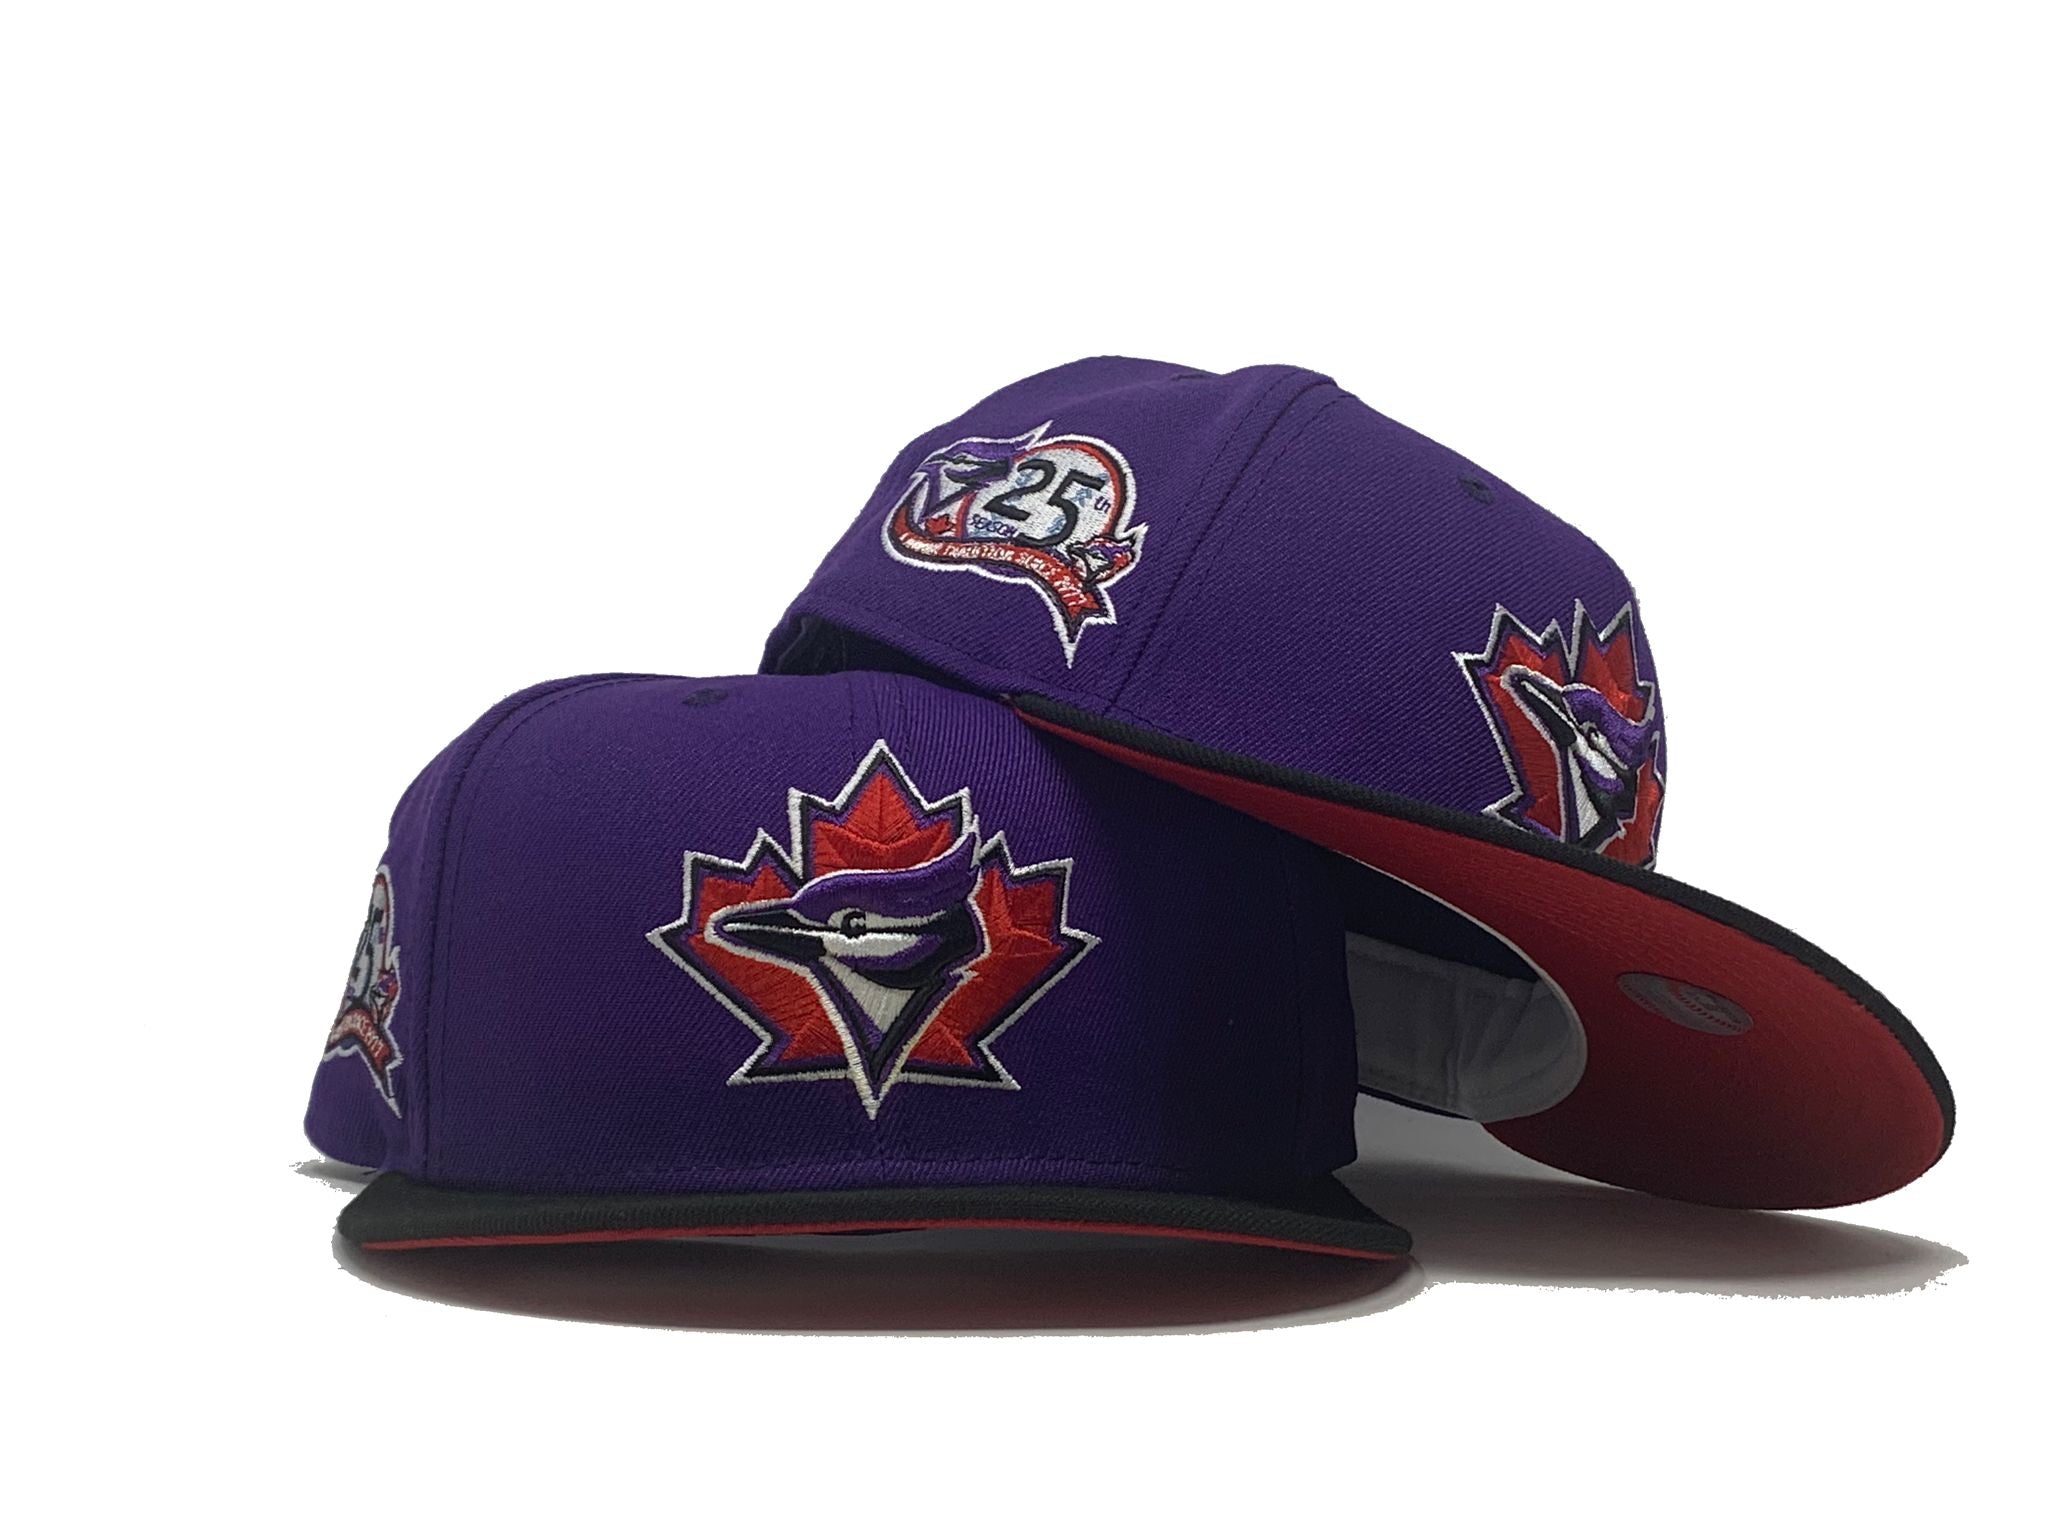 Era+MLB+Toronto+Blue+Jays+St+Patrick%27s+Day+2019+59fifty+Fitted+Hat+Cap+Sz+7  for sale online